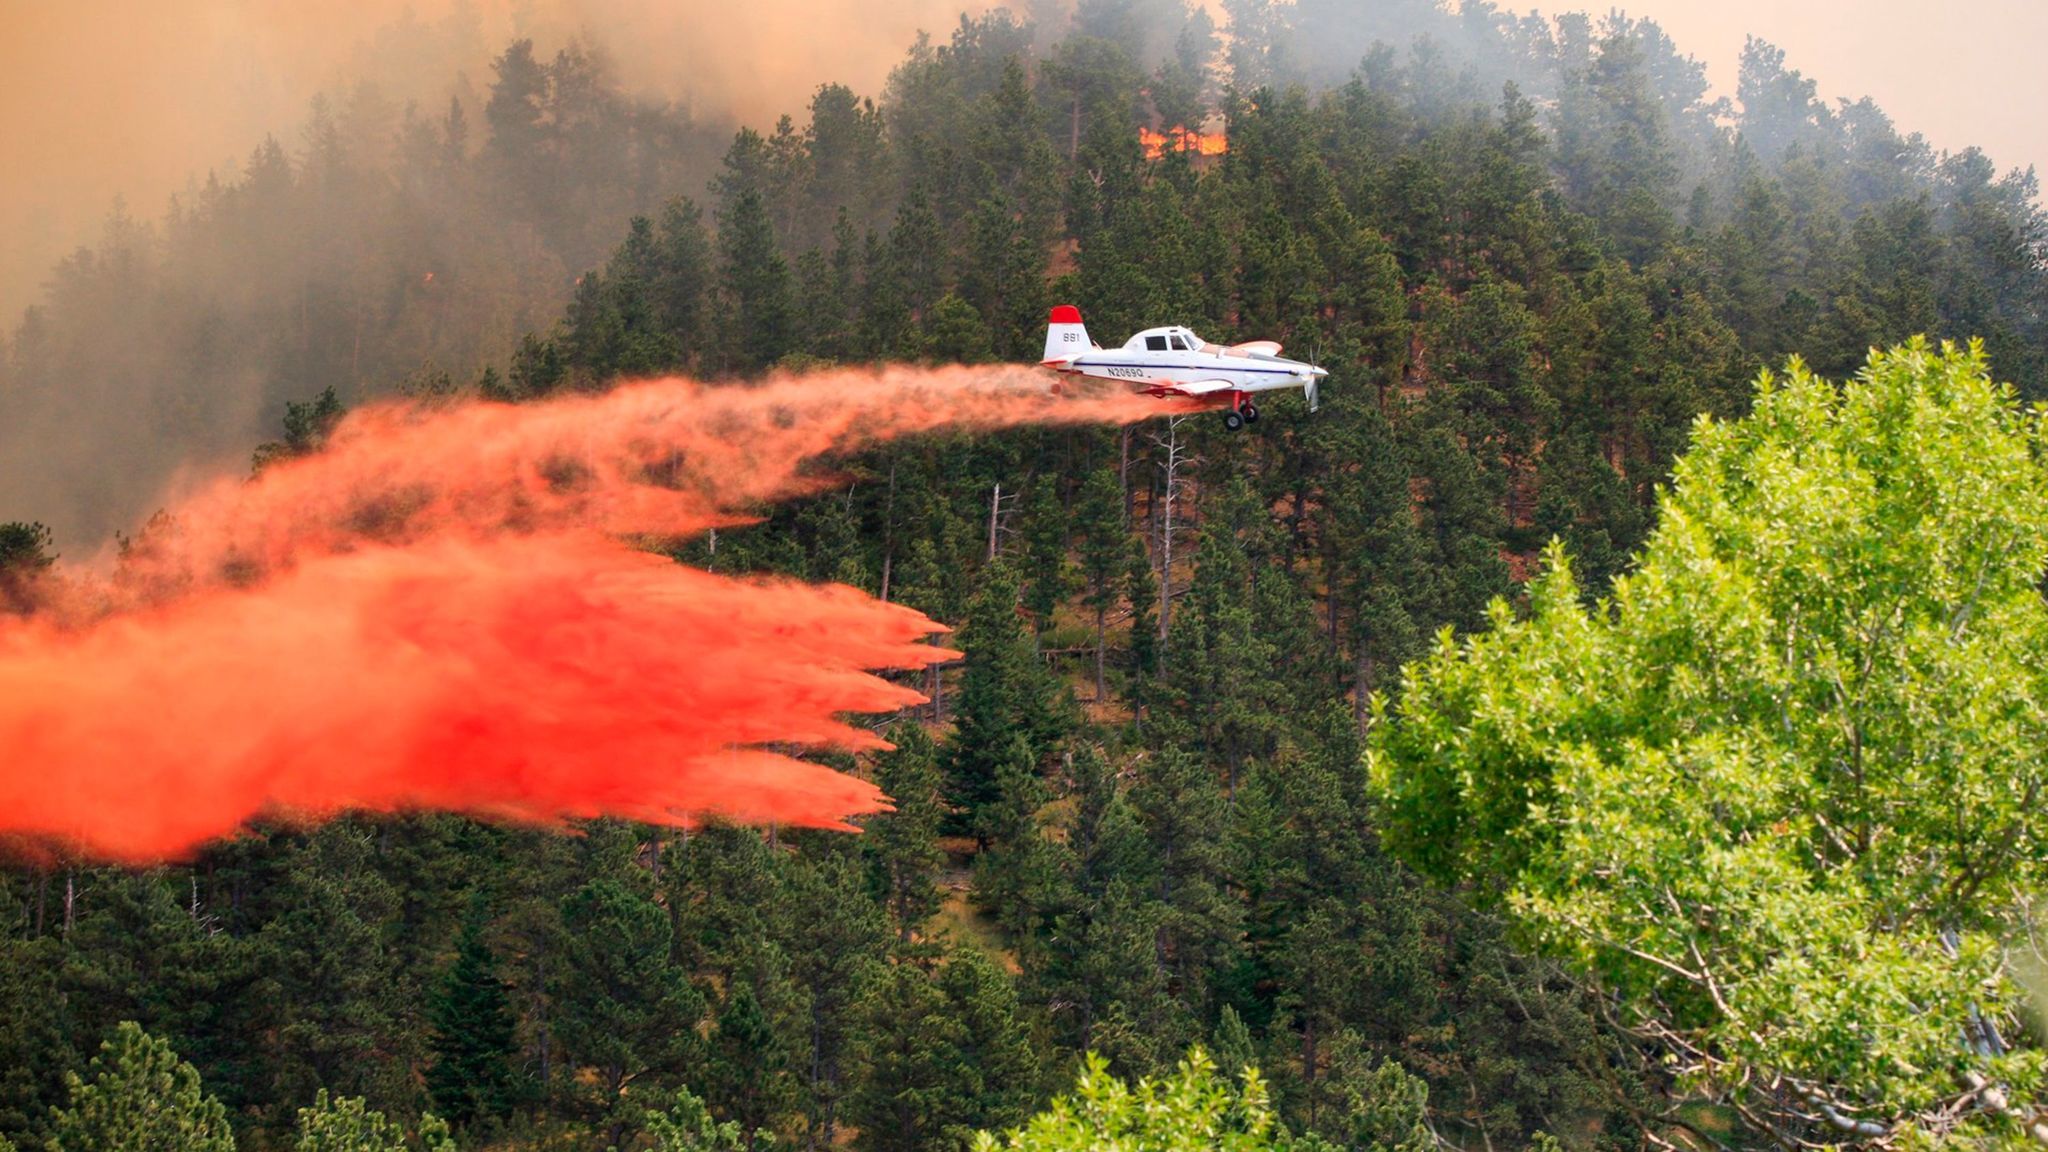 A plane drops retardant on a wildfire near the historic mining town of Landusky, south of the Fort Belknap Indian Reservation in north-central Montana.